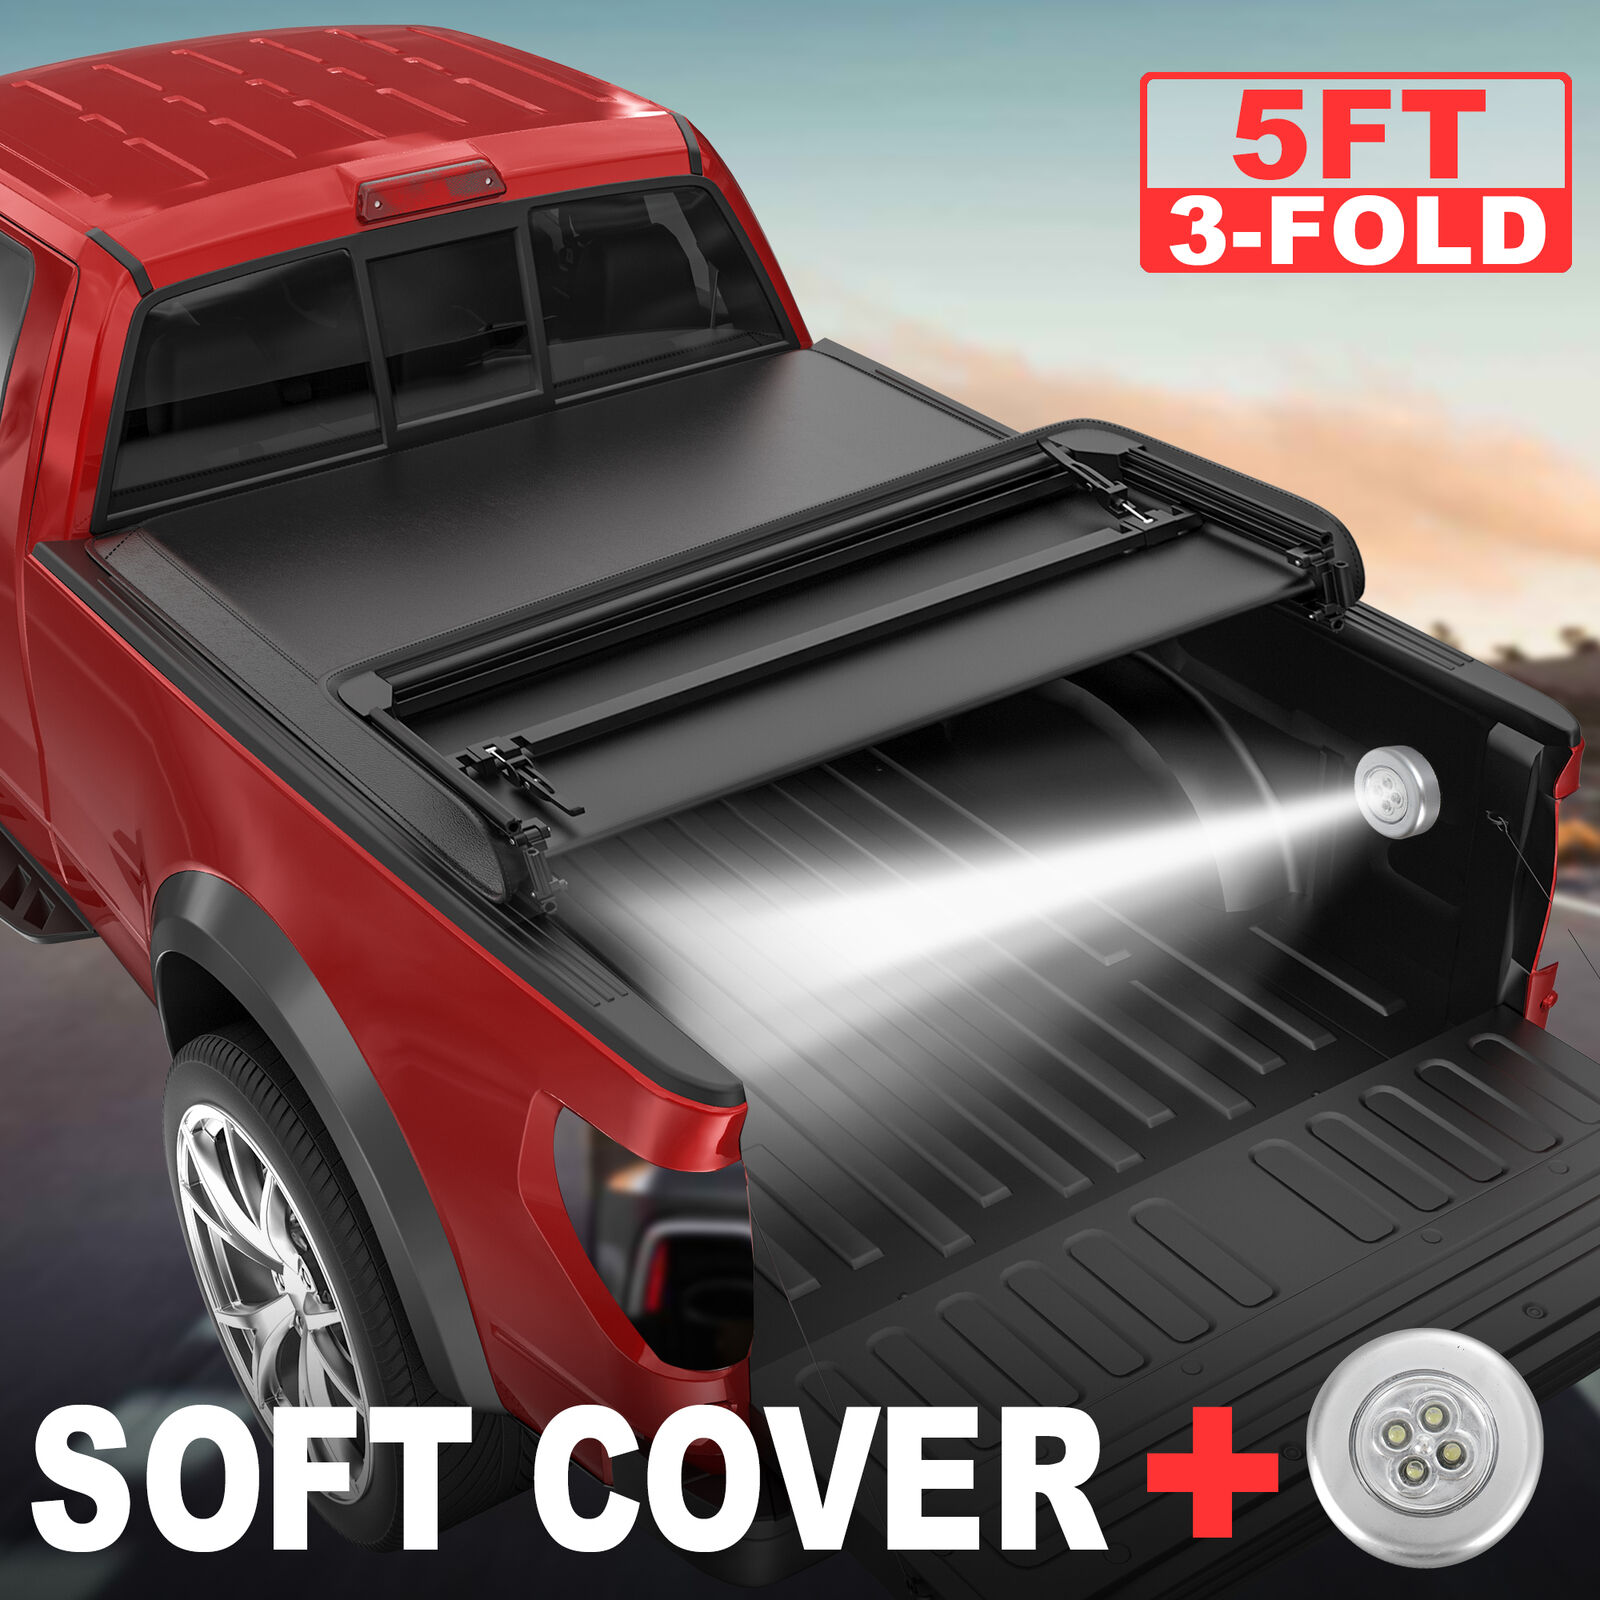 5FT Truck Bed Tri-Fold Tonneau Cover For 2004-2012 Chevy Colorado GMC Canyon